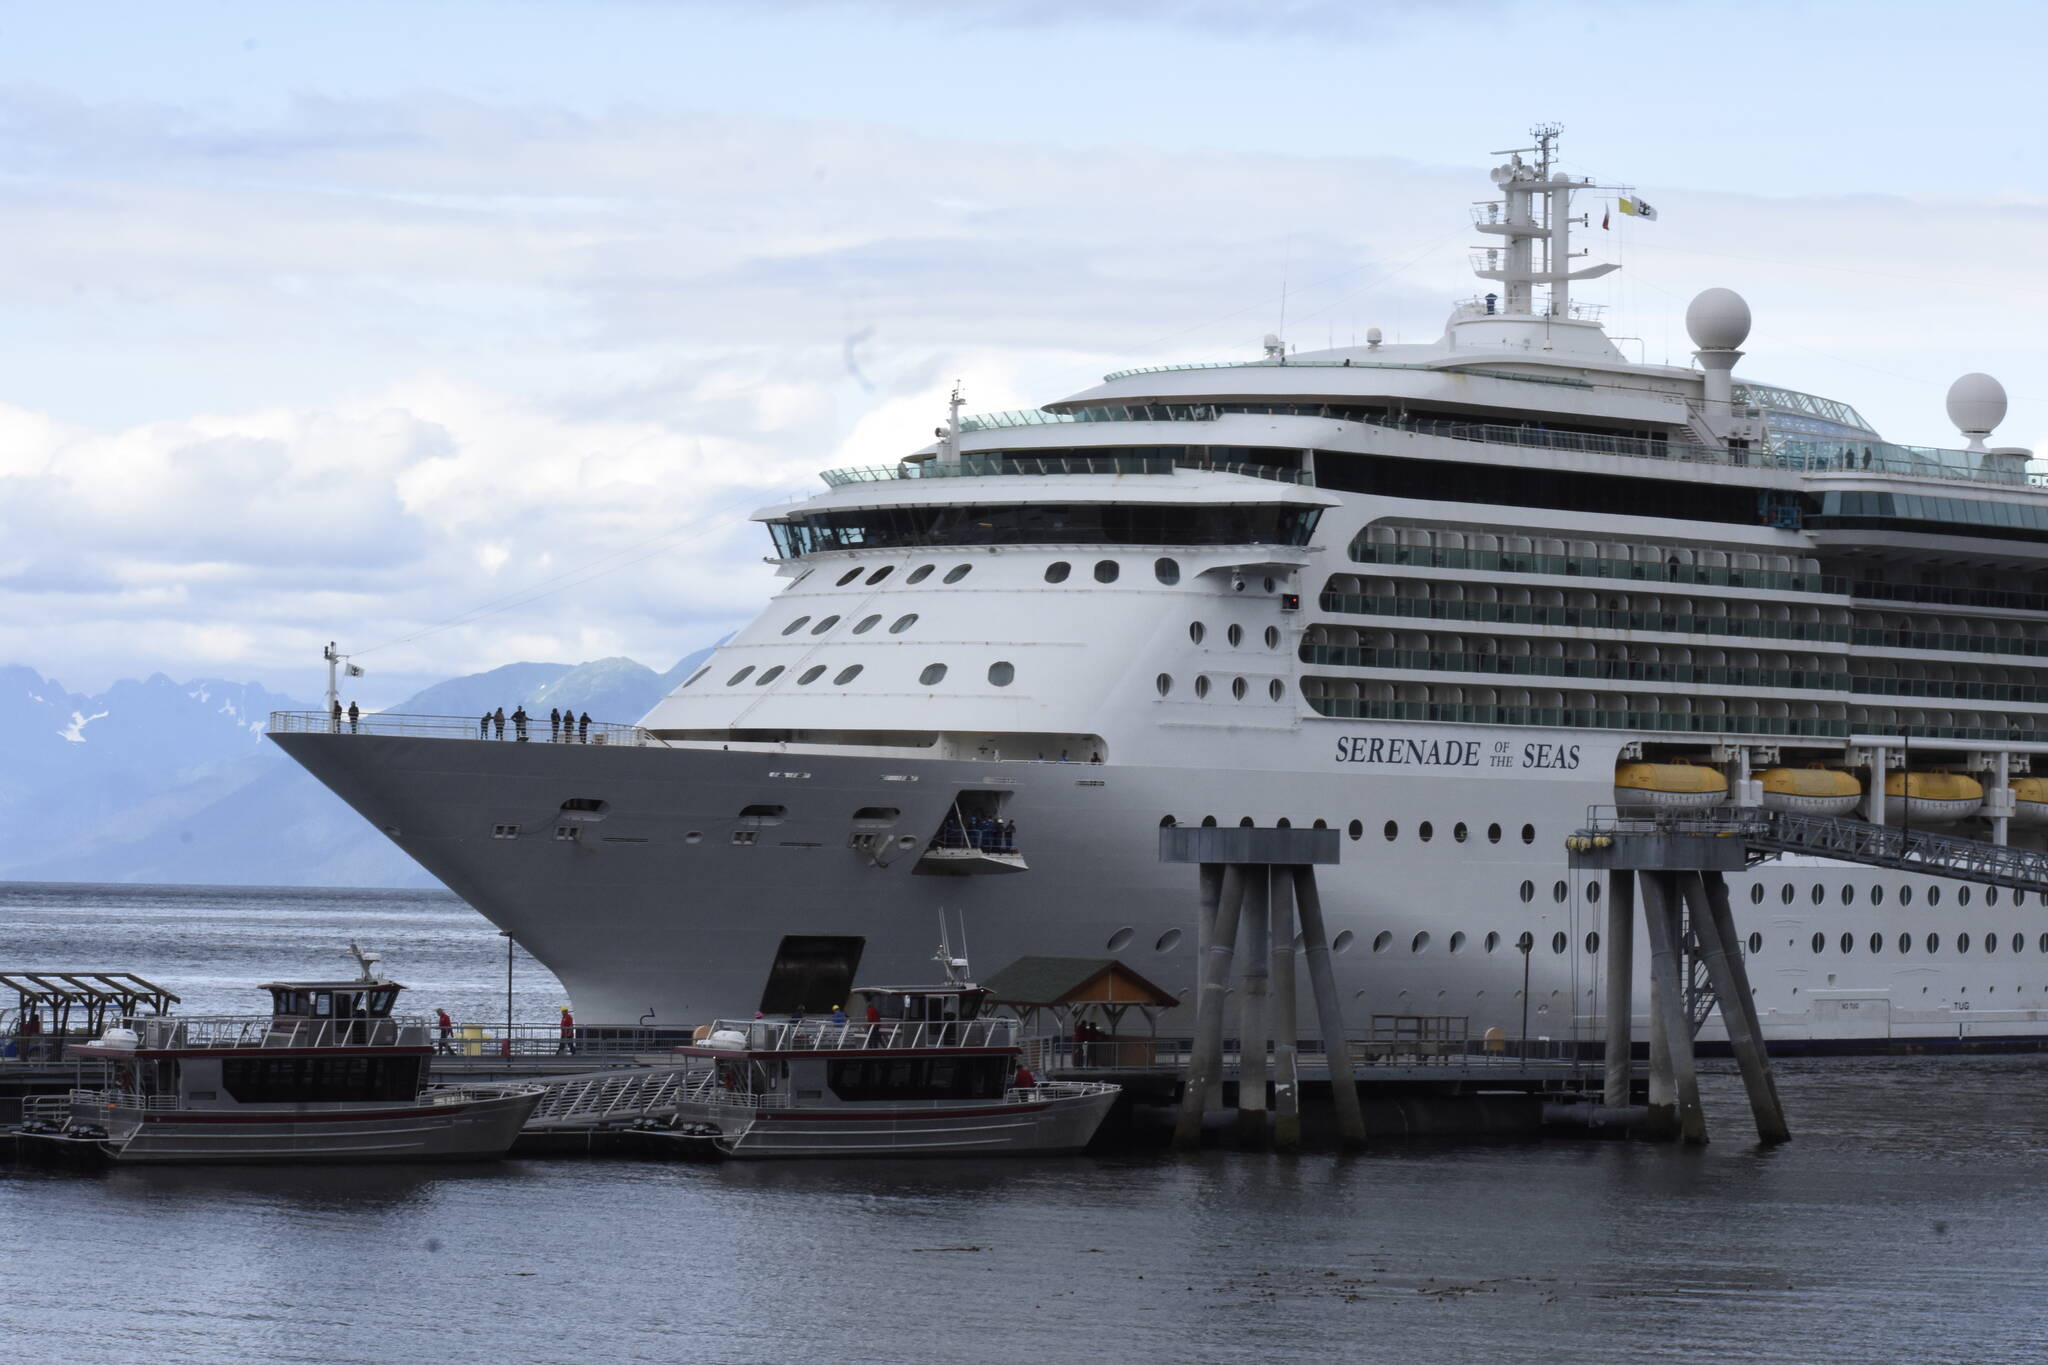 Royal Caribbean’s Serenade of the Seas pulls into Icy Point Strait in Hoonah, on Thursday, July 22, 2021. Royal Caribbean personnel are saying booking numbers for the 2022 season are looking healthy. (Peter Segall / Juneau Empire File)